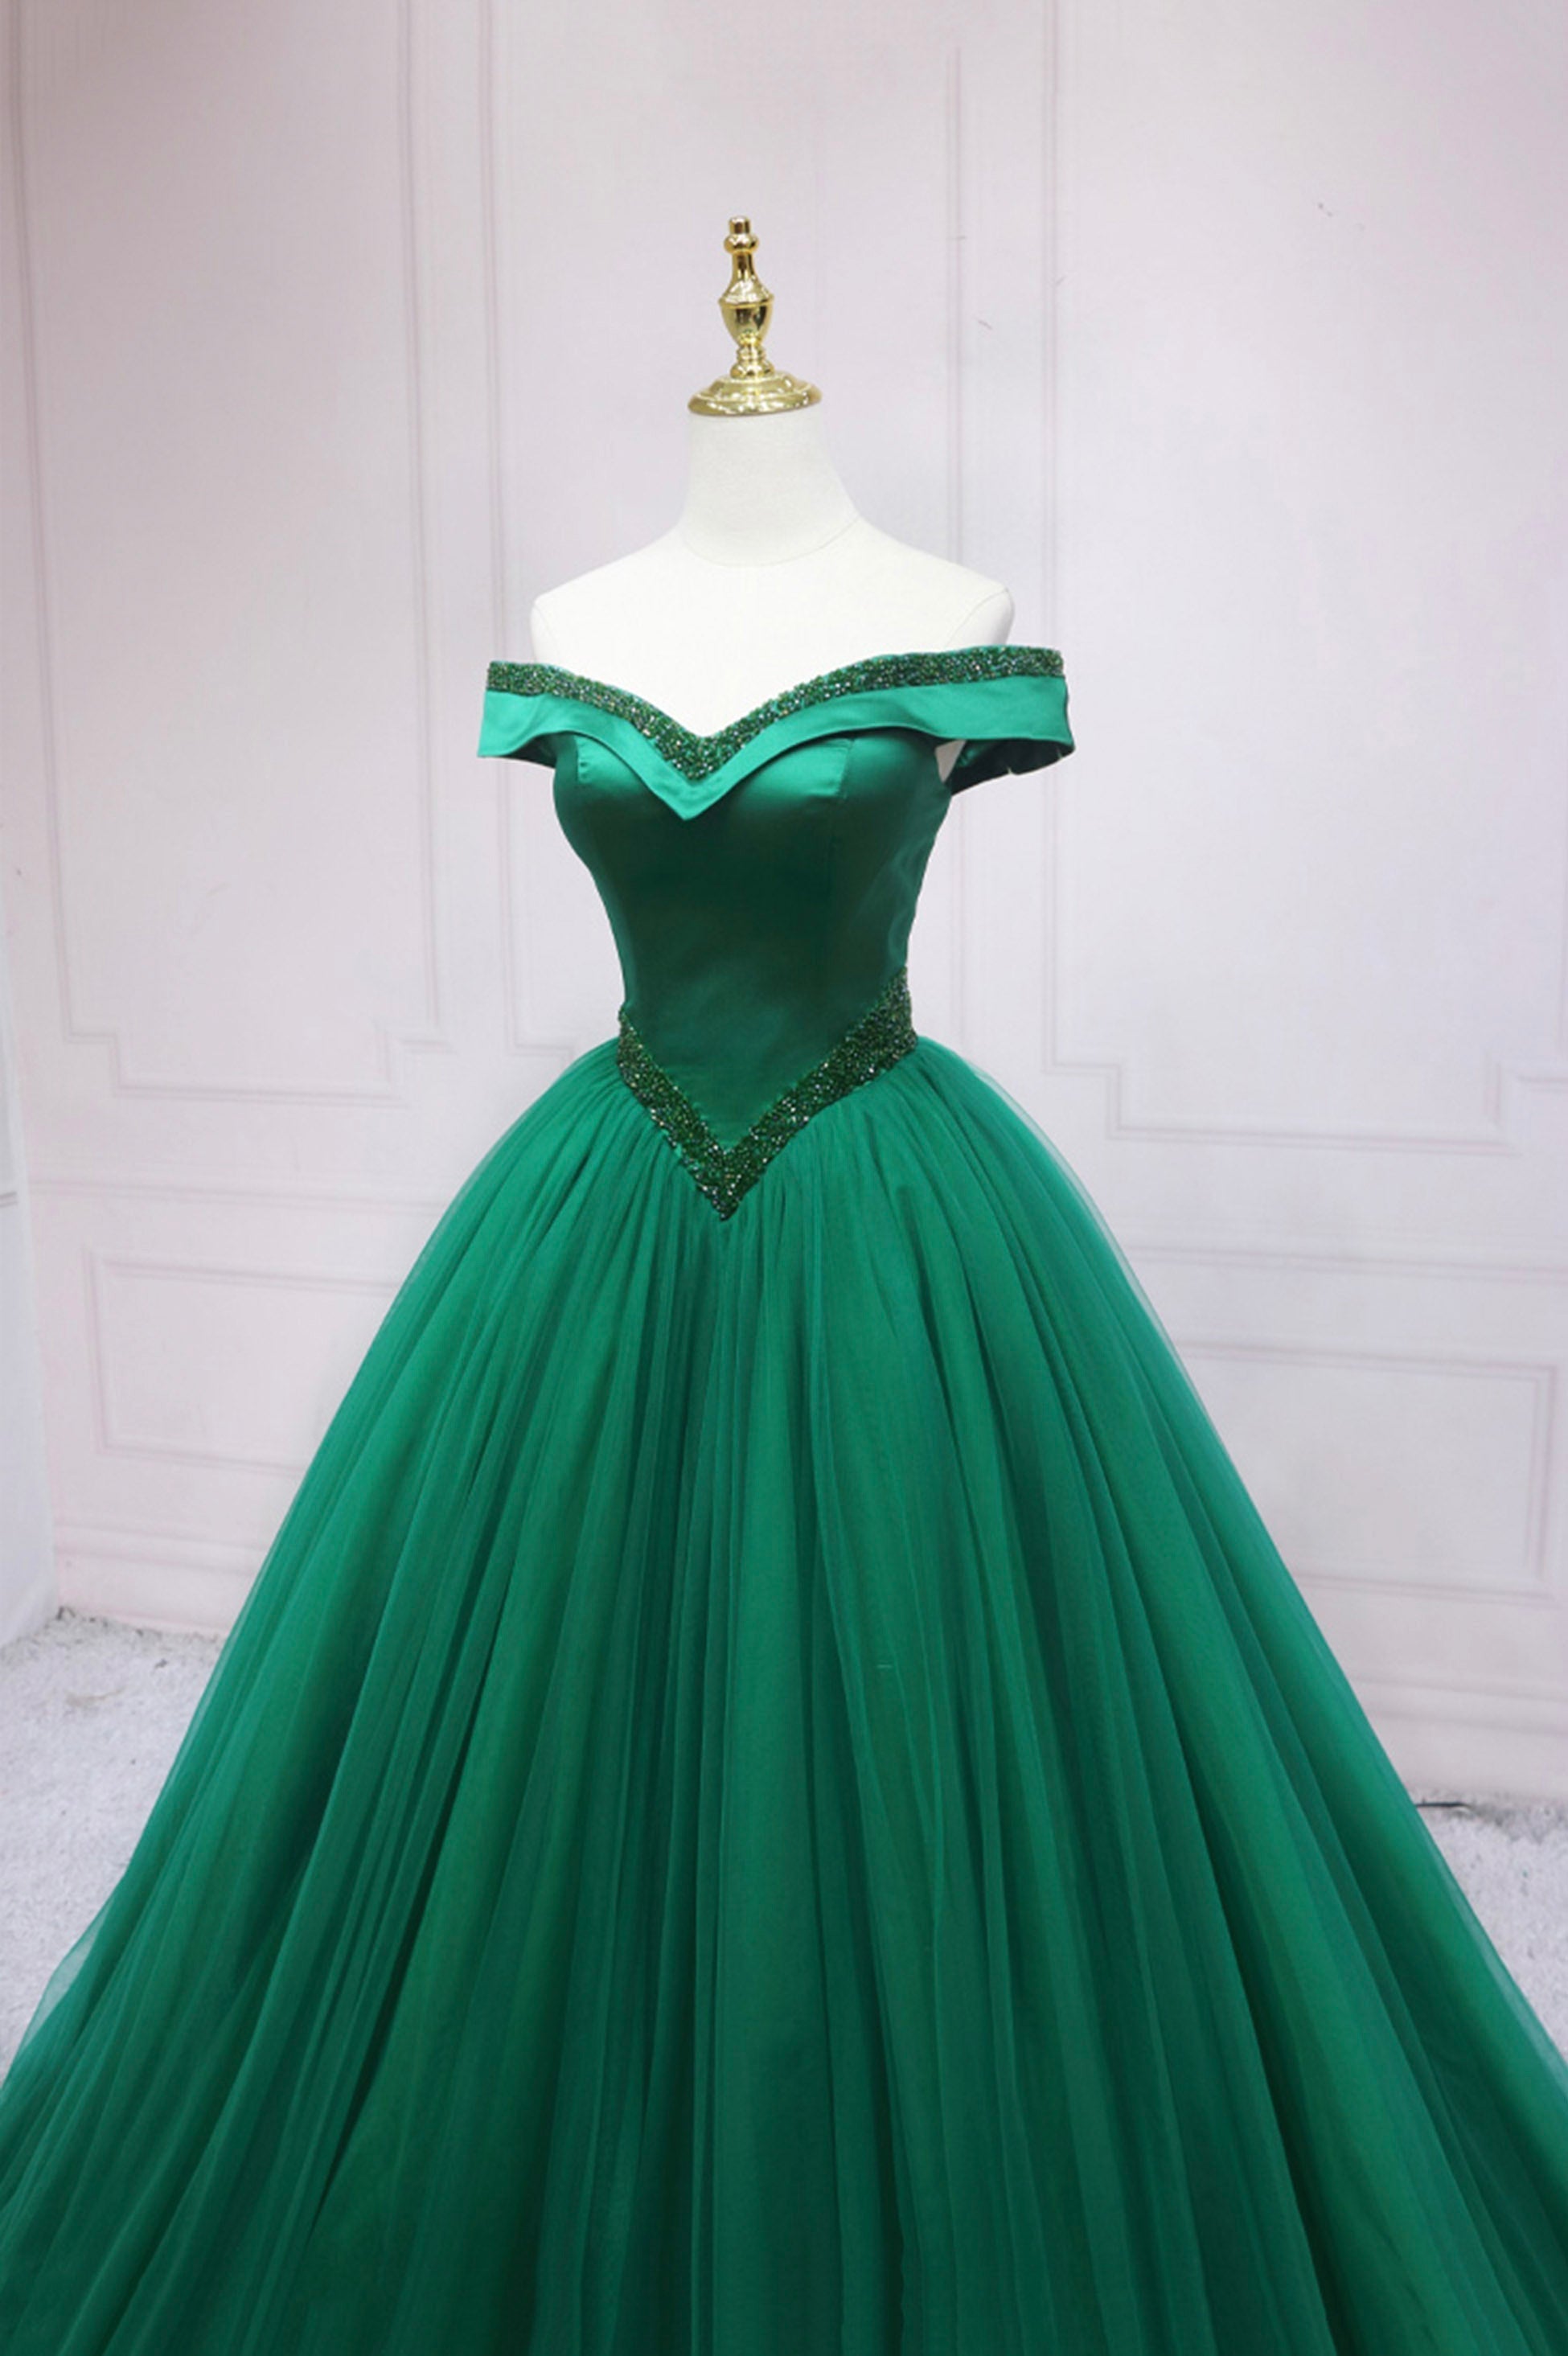 Prom Dresses Long Light Blue, Green Tulle Long A-Line Ball Gown, Off the Shoulder Evening Dress